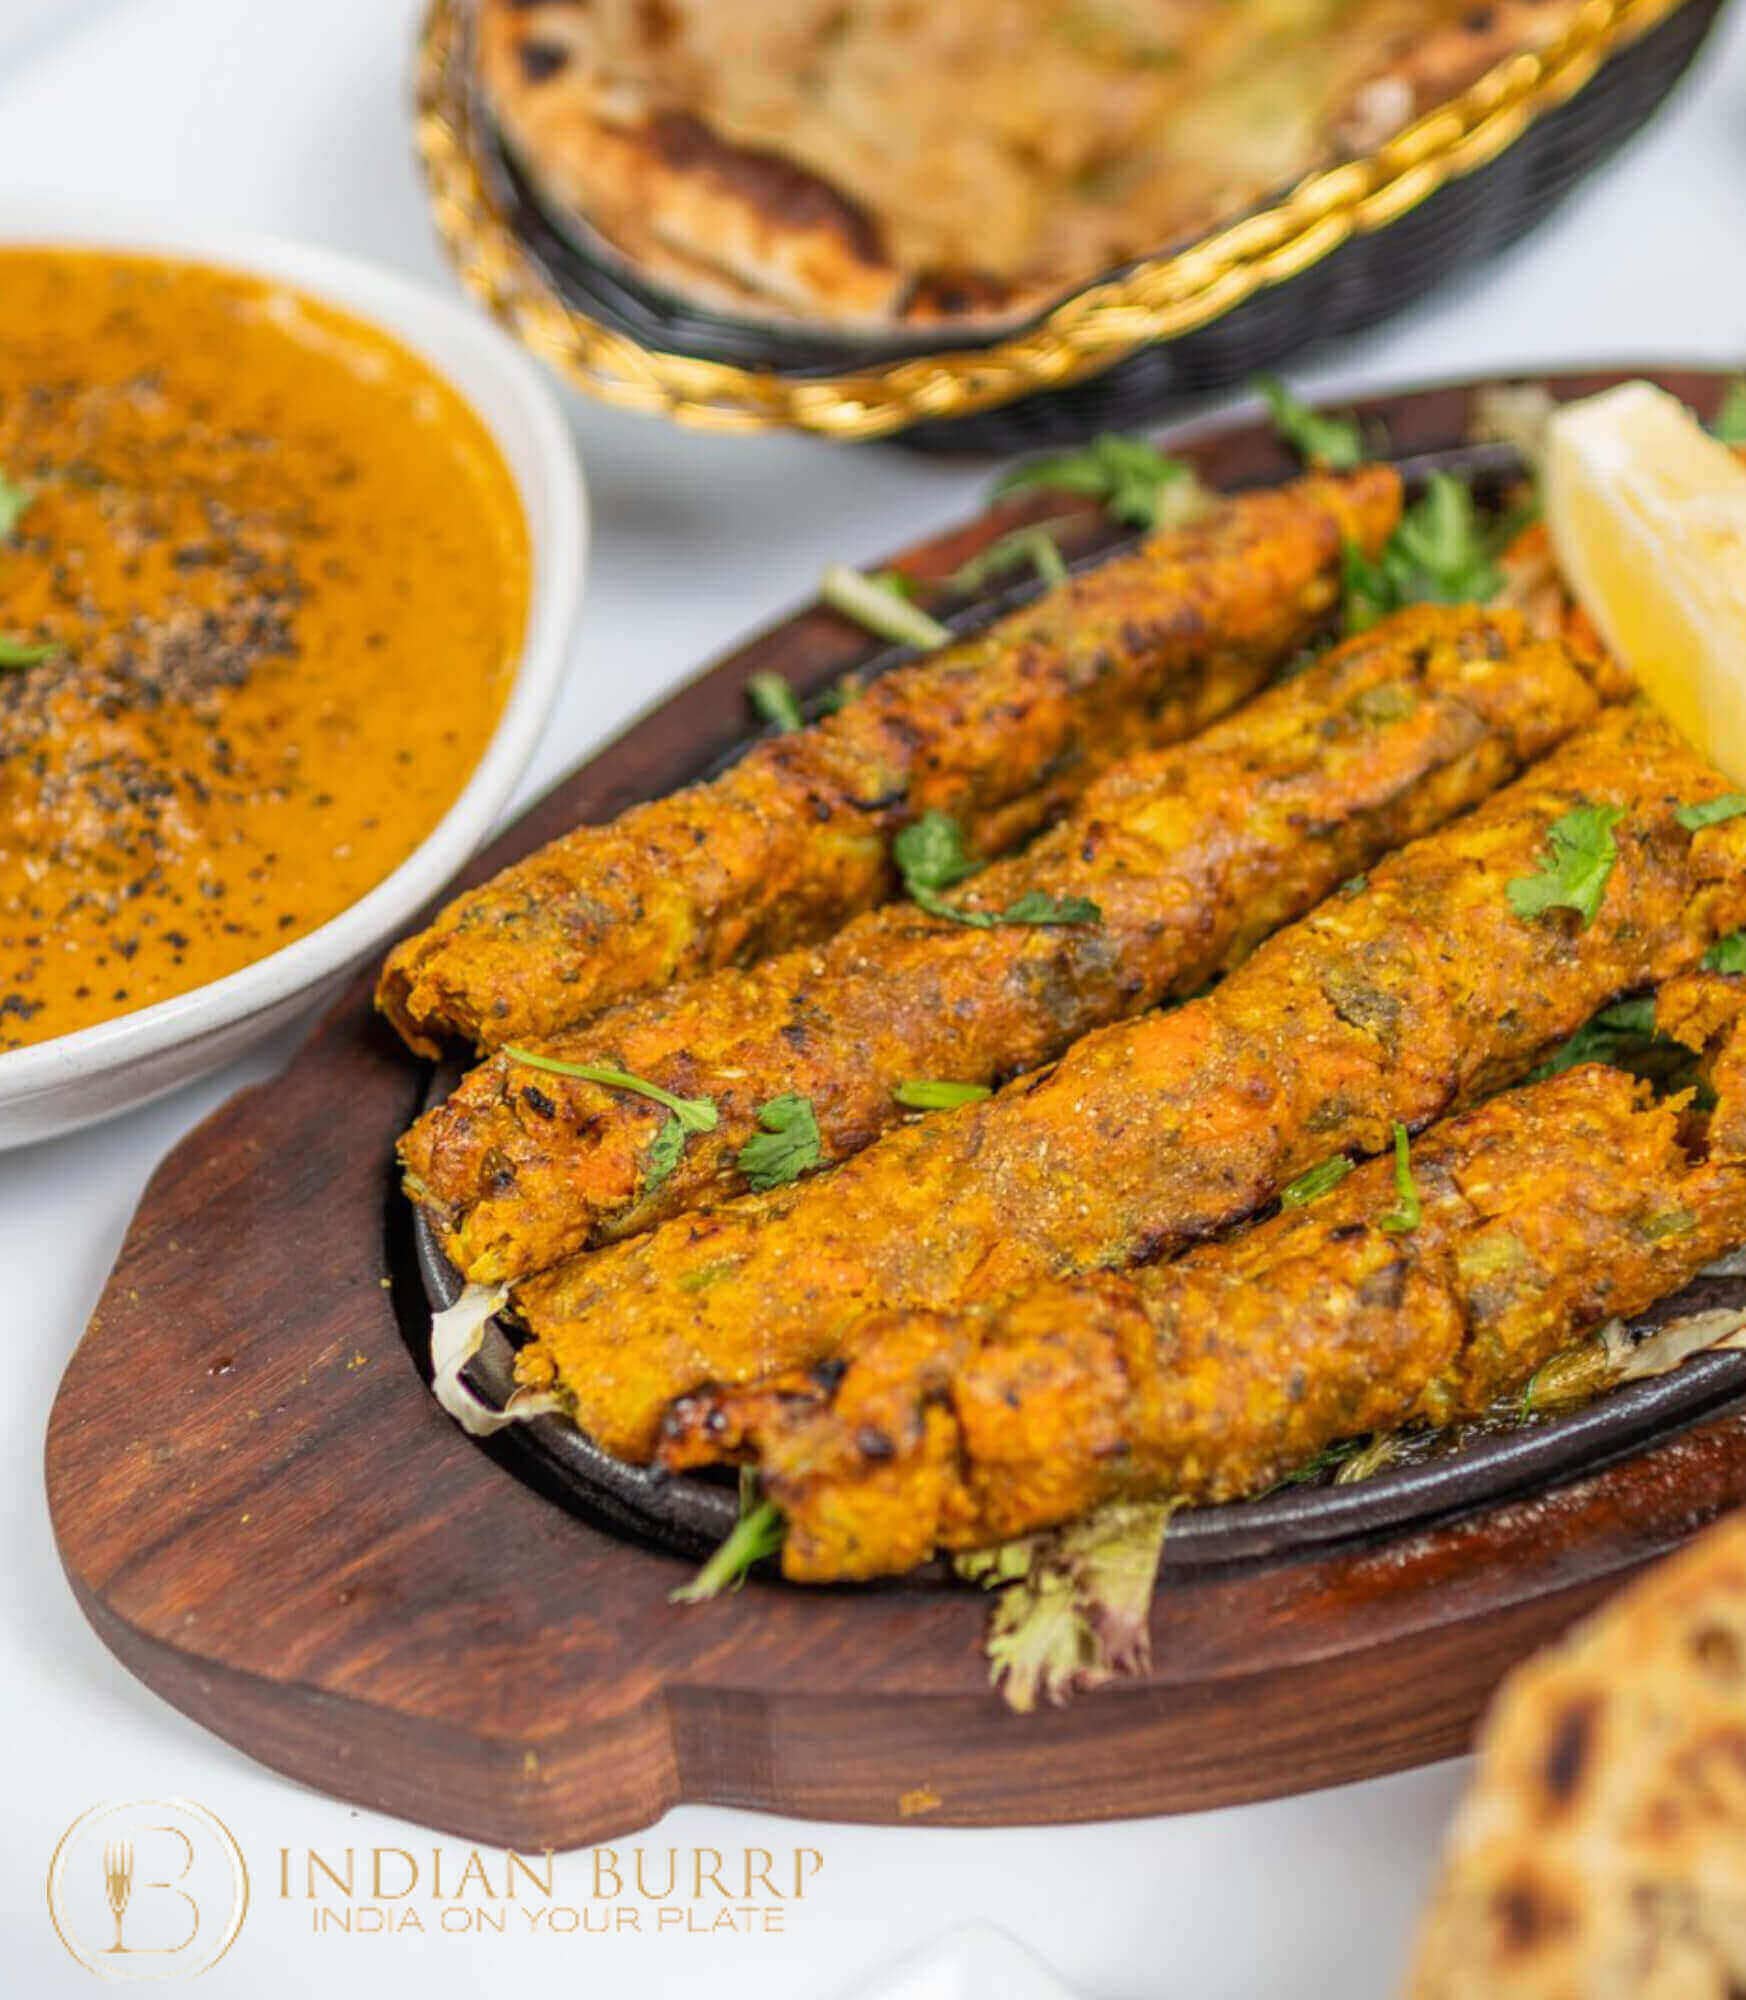 What Makes Lamb Seekh Kebabs a Great Barbecue Dish